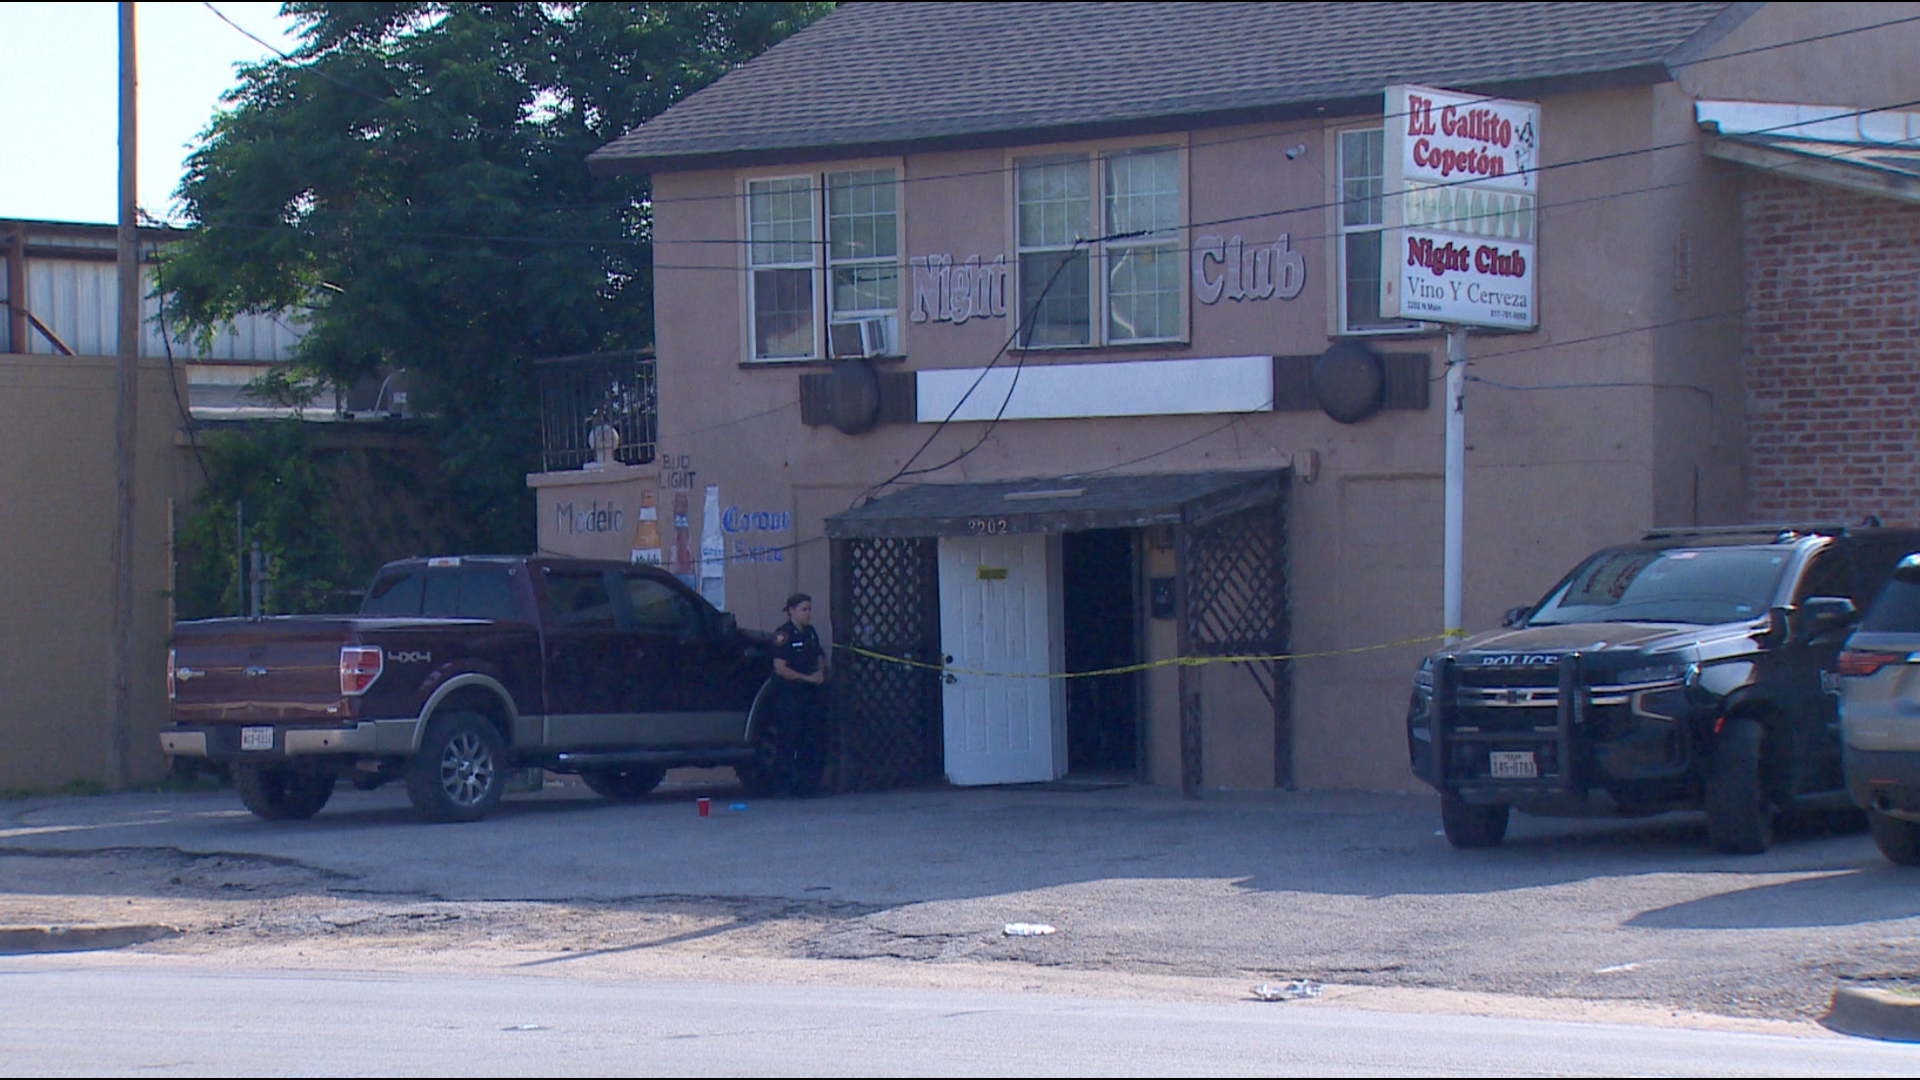 El Gallito Nightclub, located several blocks north of the Stockyards was the site of another fatal shooting, according to Fort Worth police.